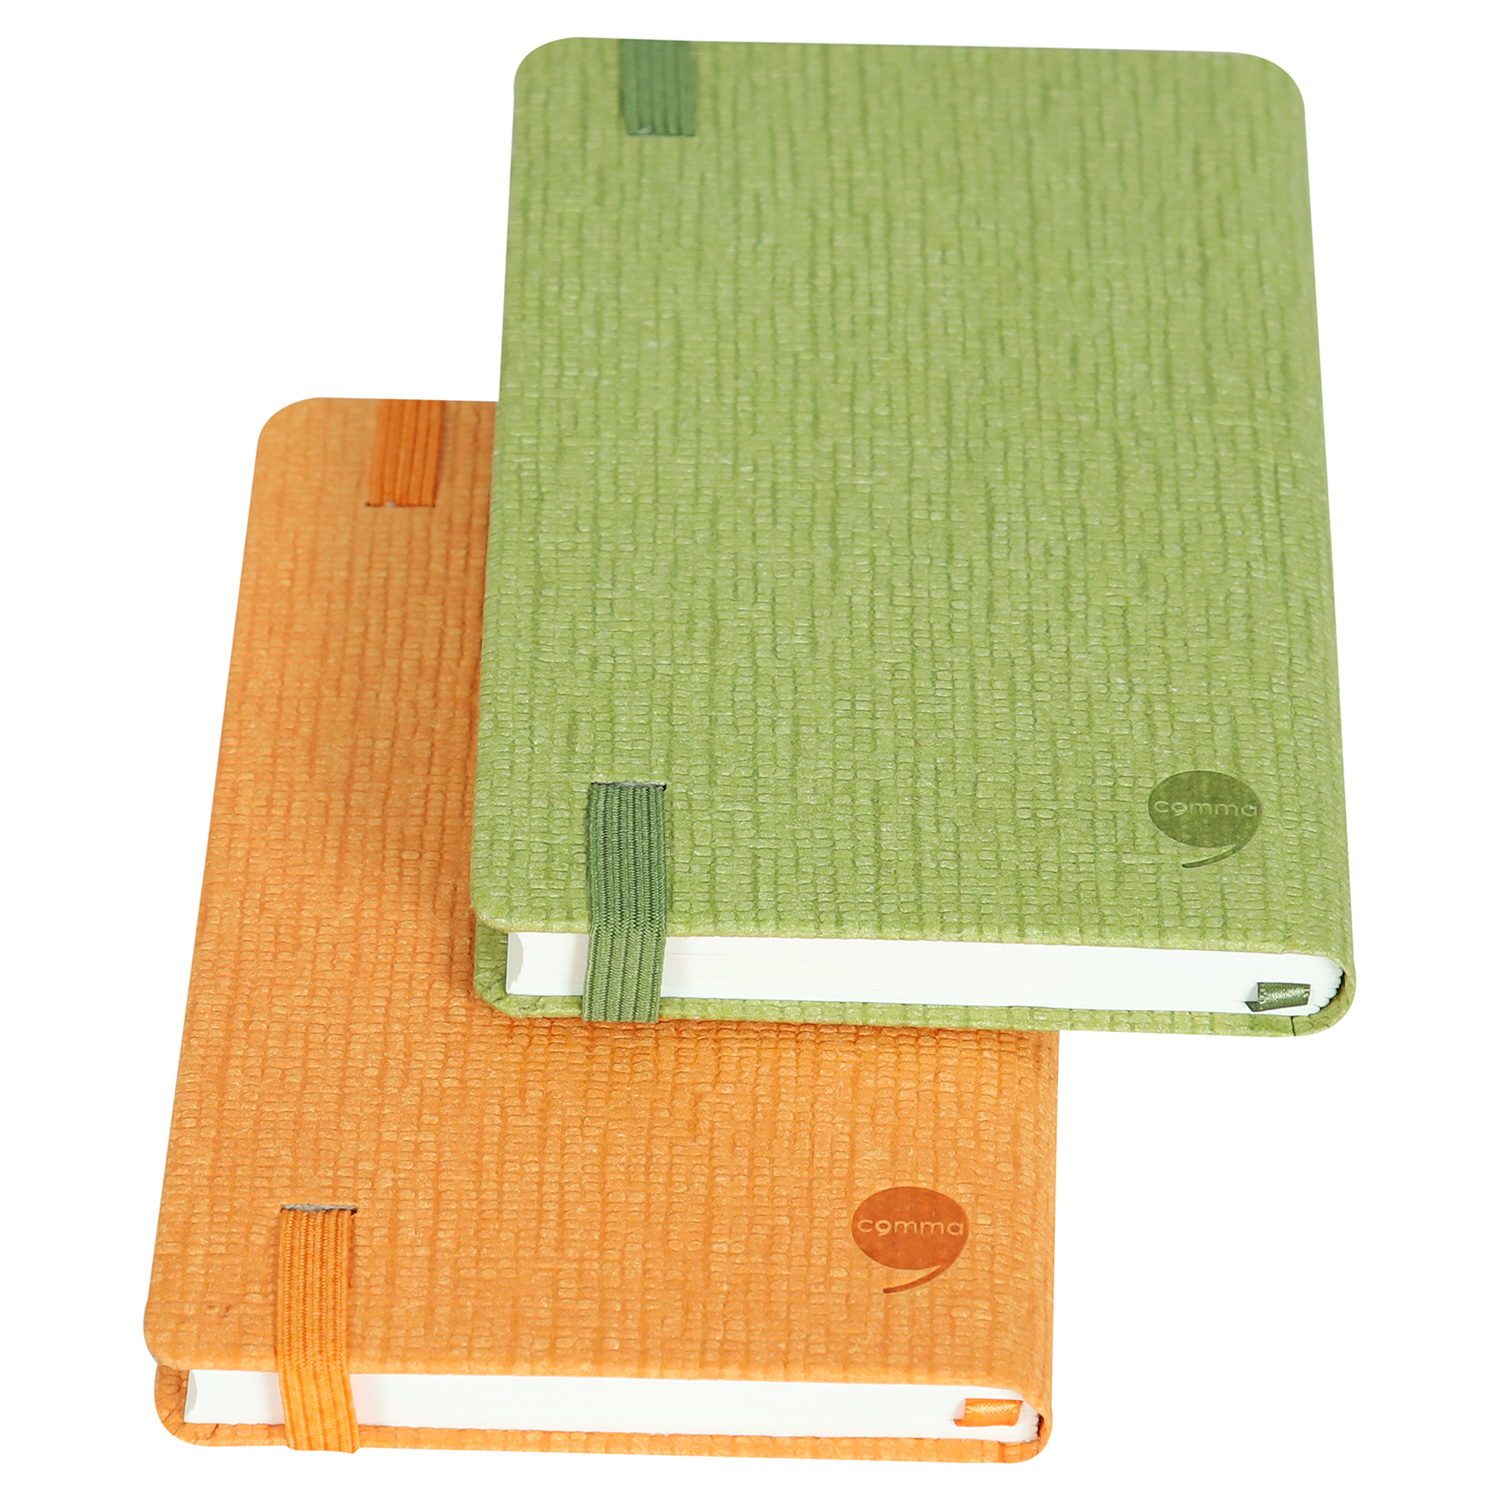 Comma Abaca - A6 Size - Hard Bound Notebook (Green and Orange)